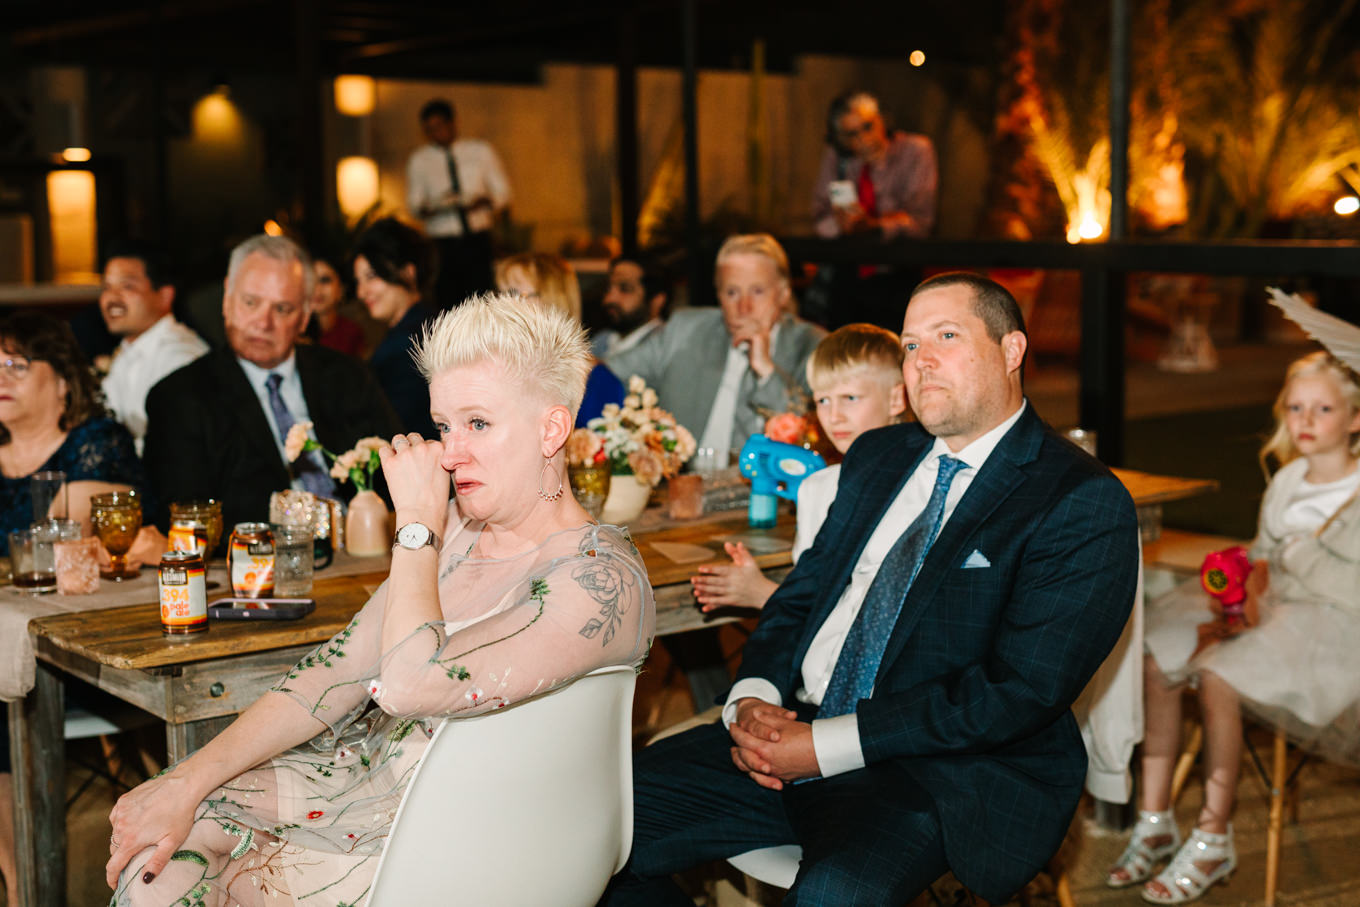 Speeches at wedding reception | Pink and orange Lautner Compound wedding | Colorful Palm Springs wedding photography | #palmspringsphotographer #palmspringswedding #lautnercompound #southerncaliforniawedding  Source: Mary Costa Photography | Los Angeles